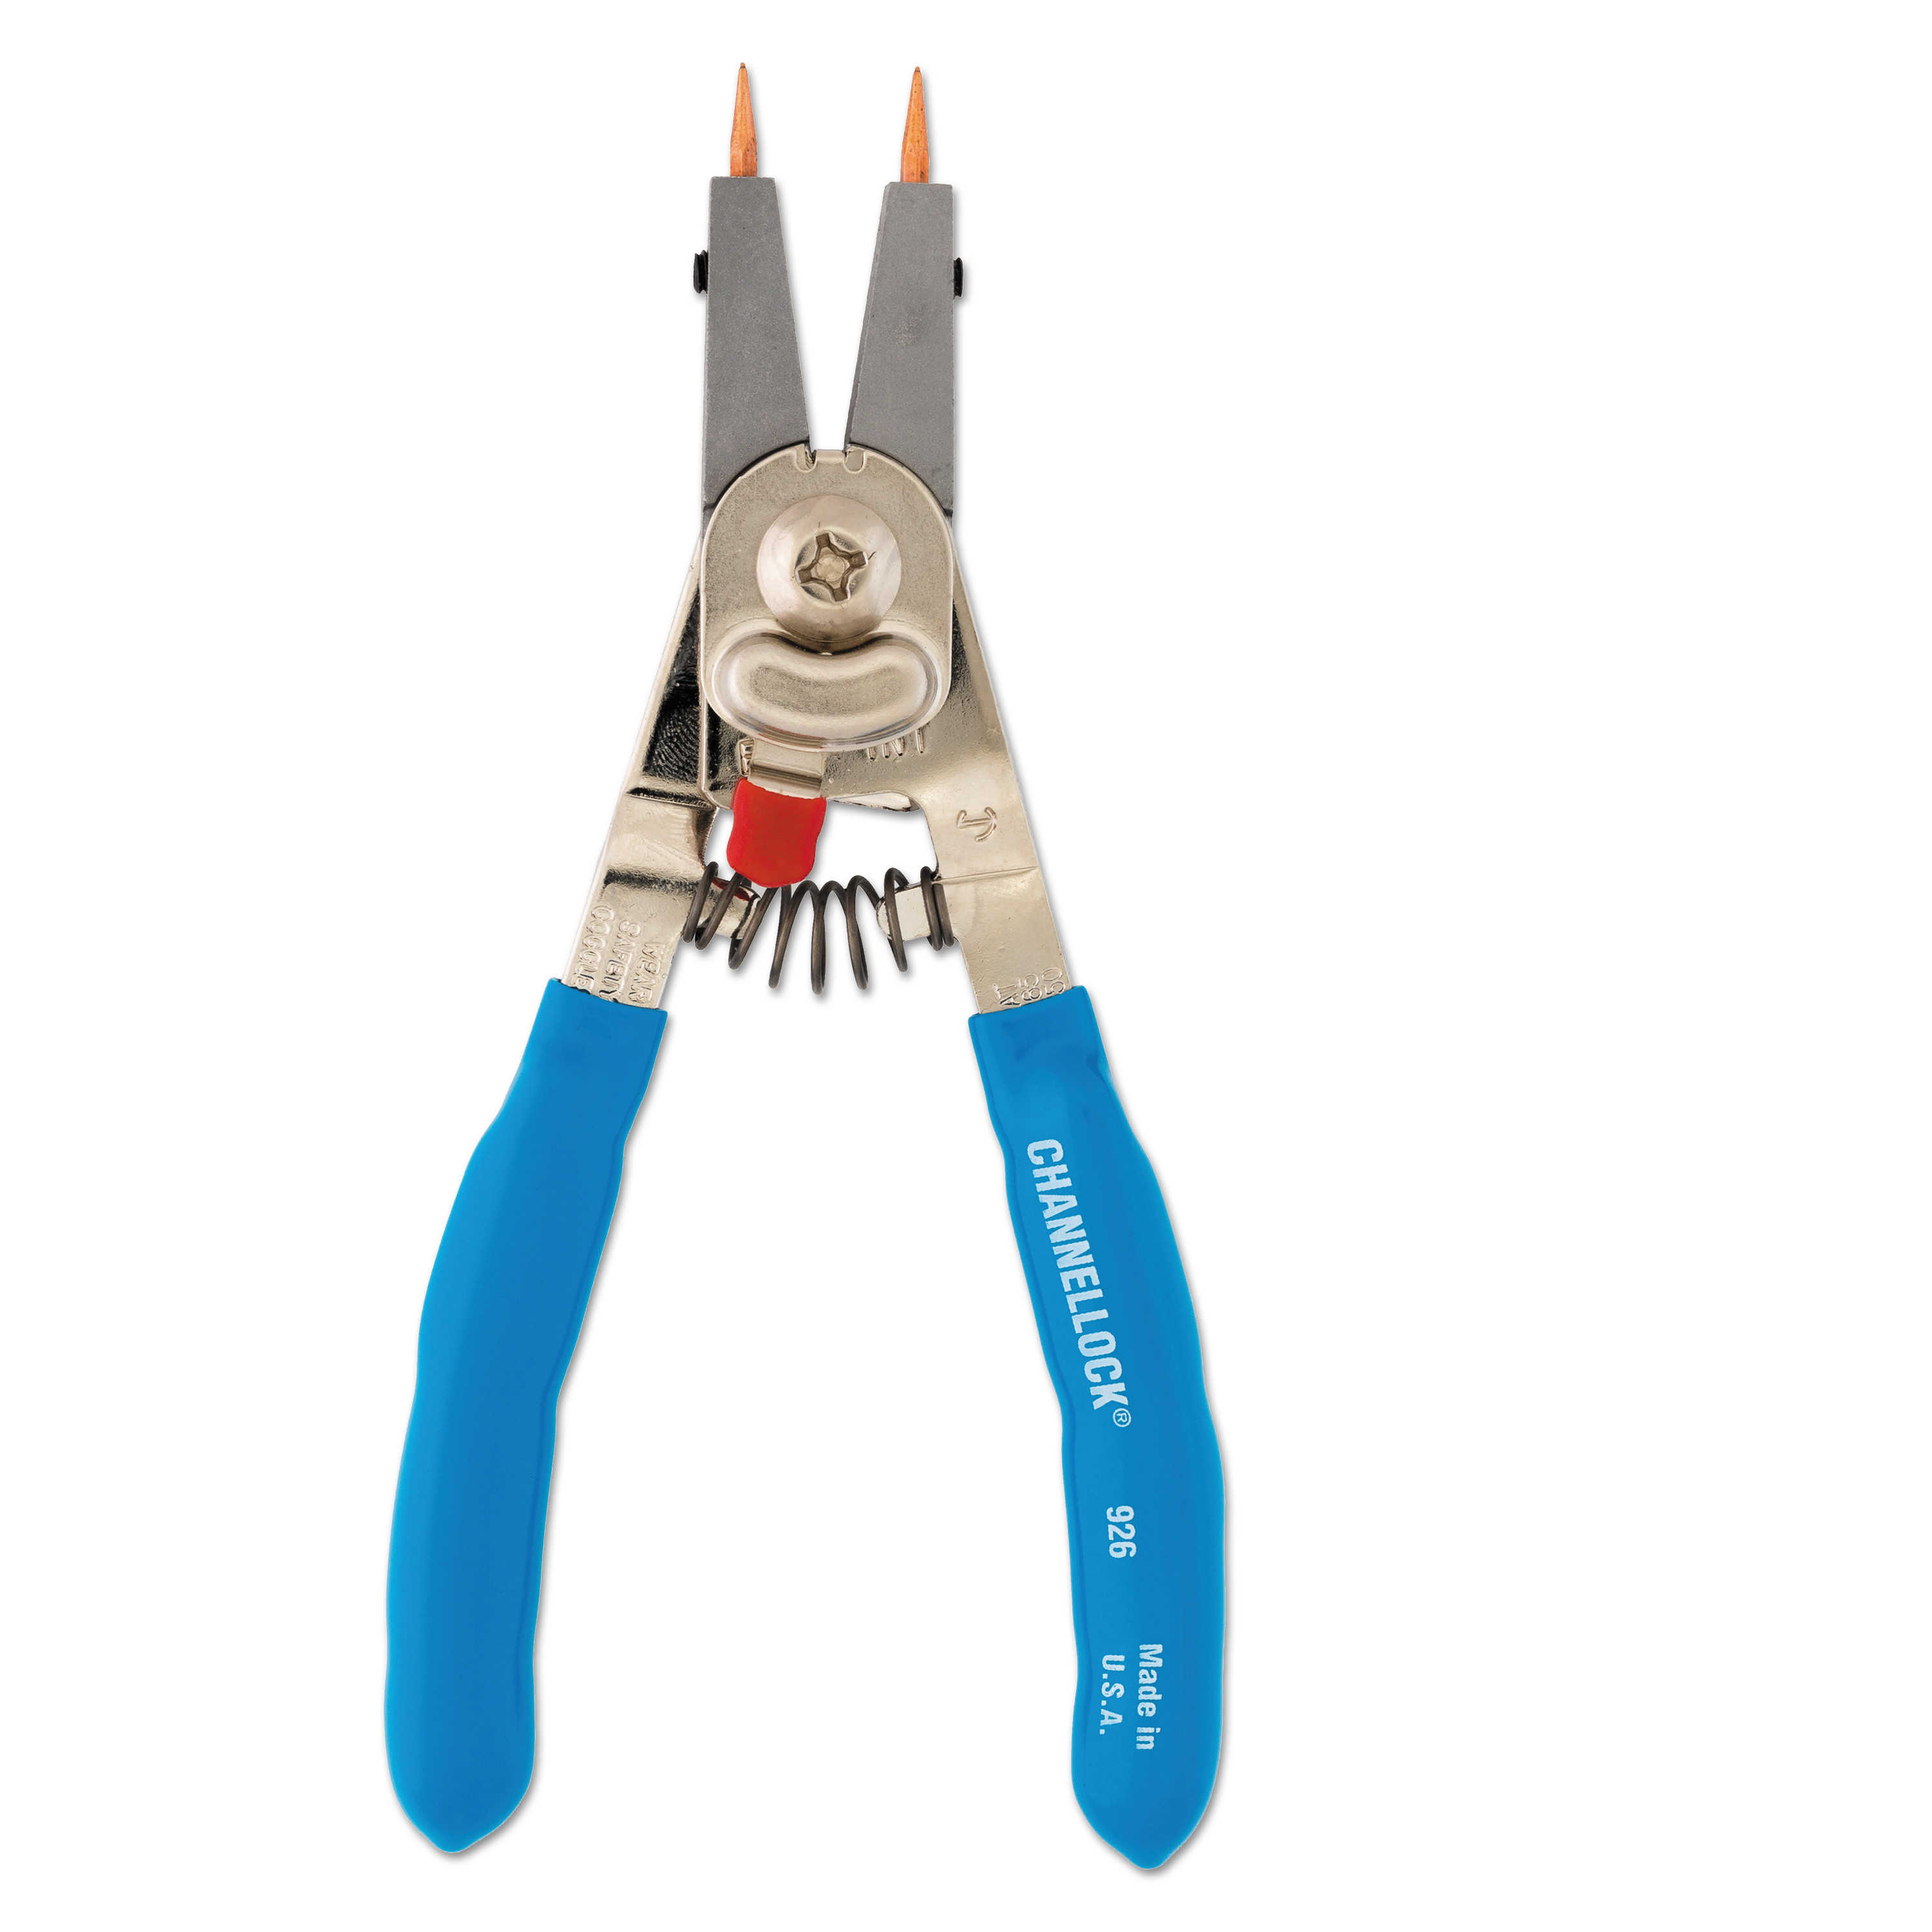 Channellock 6.25' Snap Ring Pliers